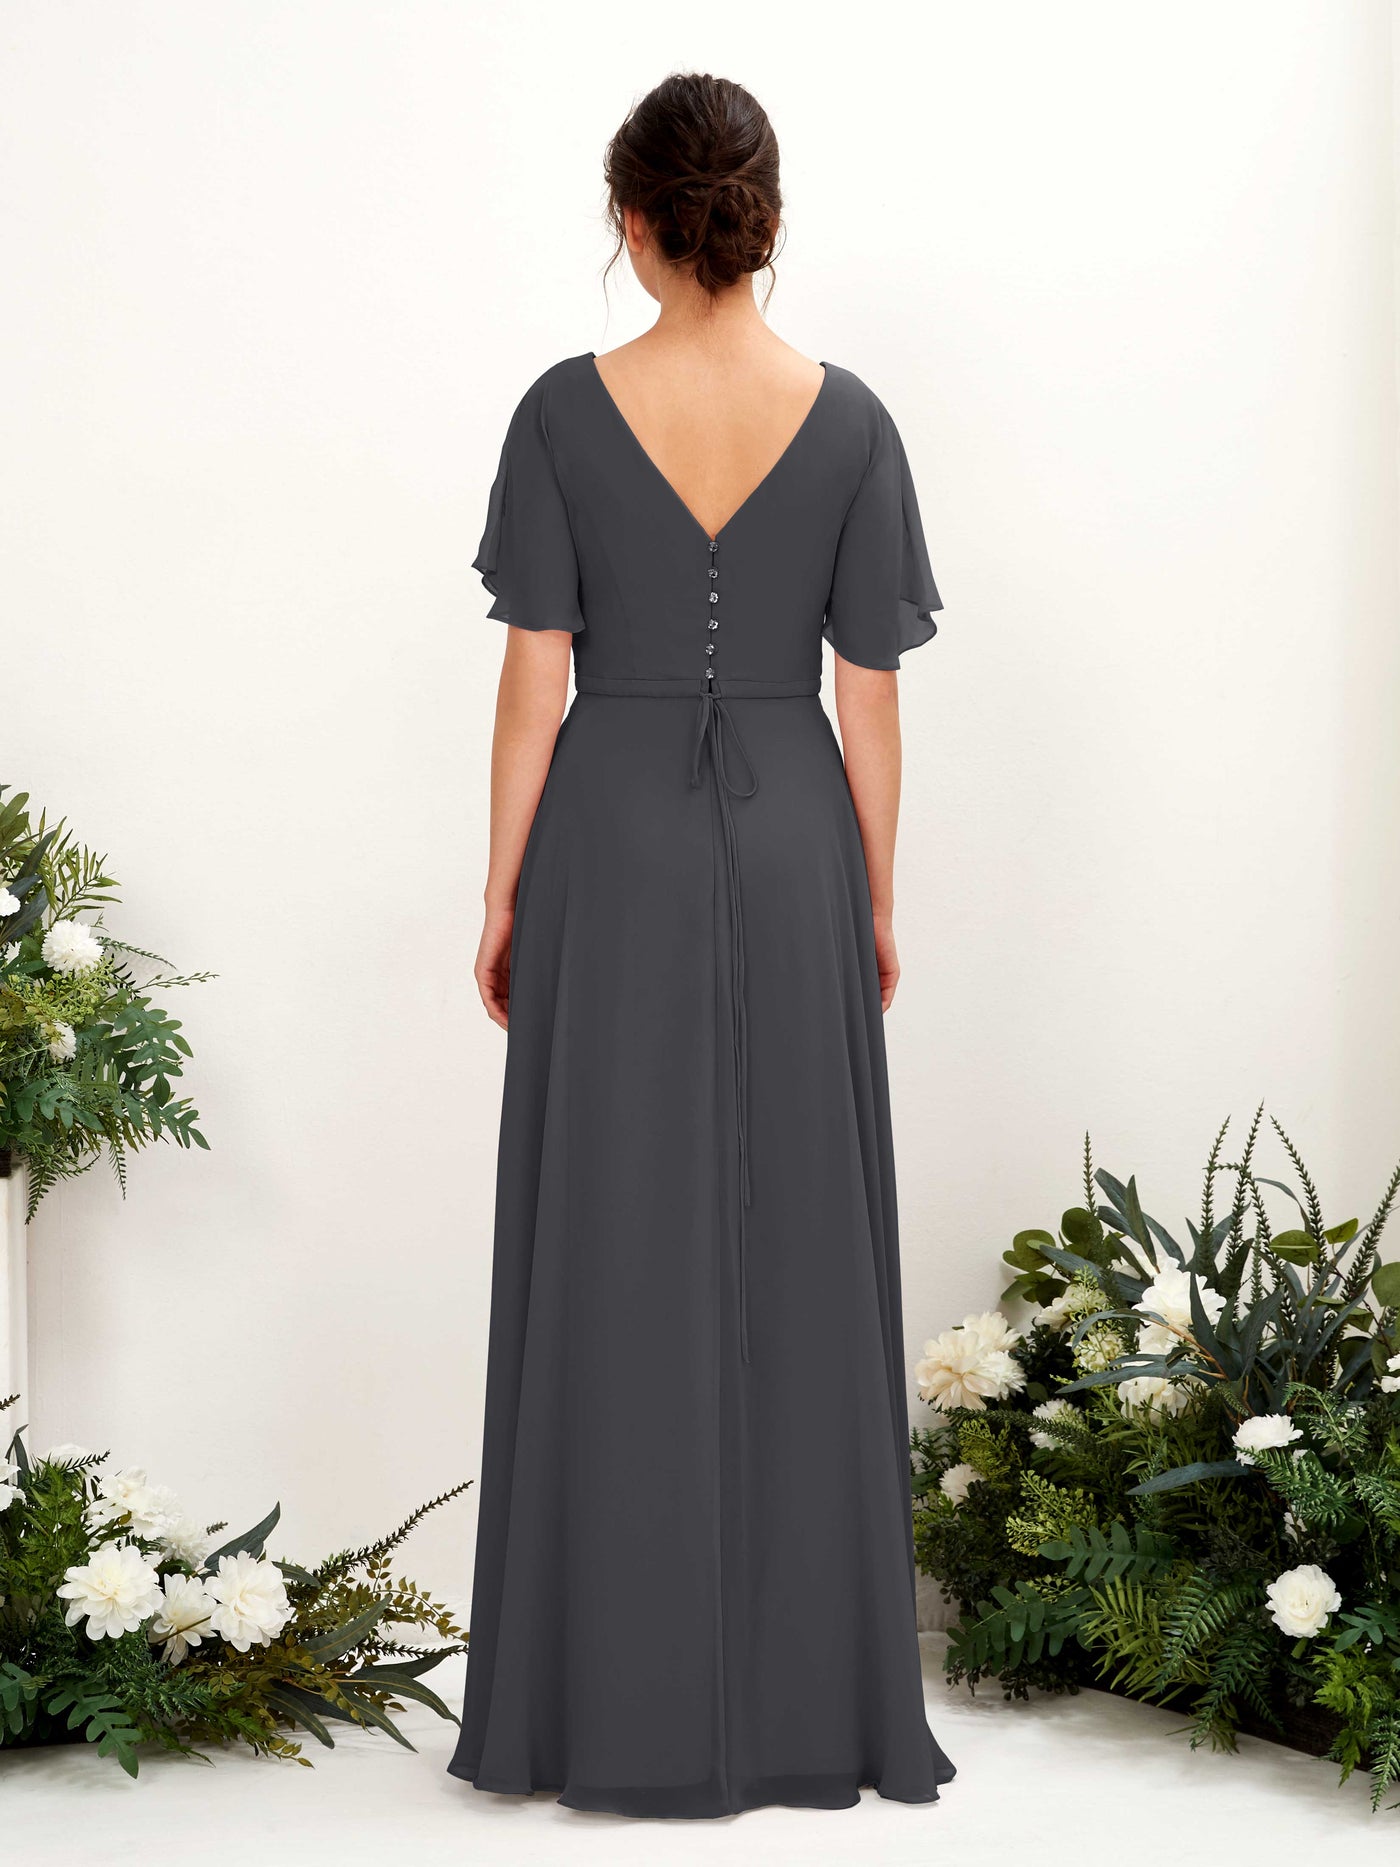 Pewter Bridesmaid Dresses Bridesmaid Dress A-line Chiffon V-neck Full Length Short Sleeves Wedding Party Dress (81224638)#color_pewter